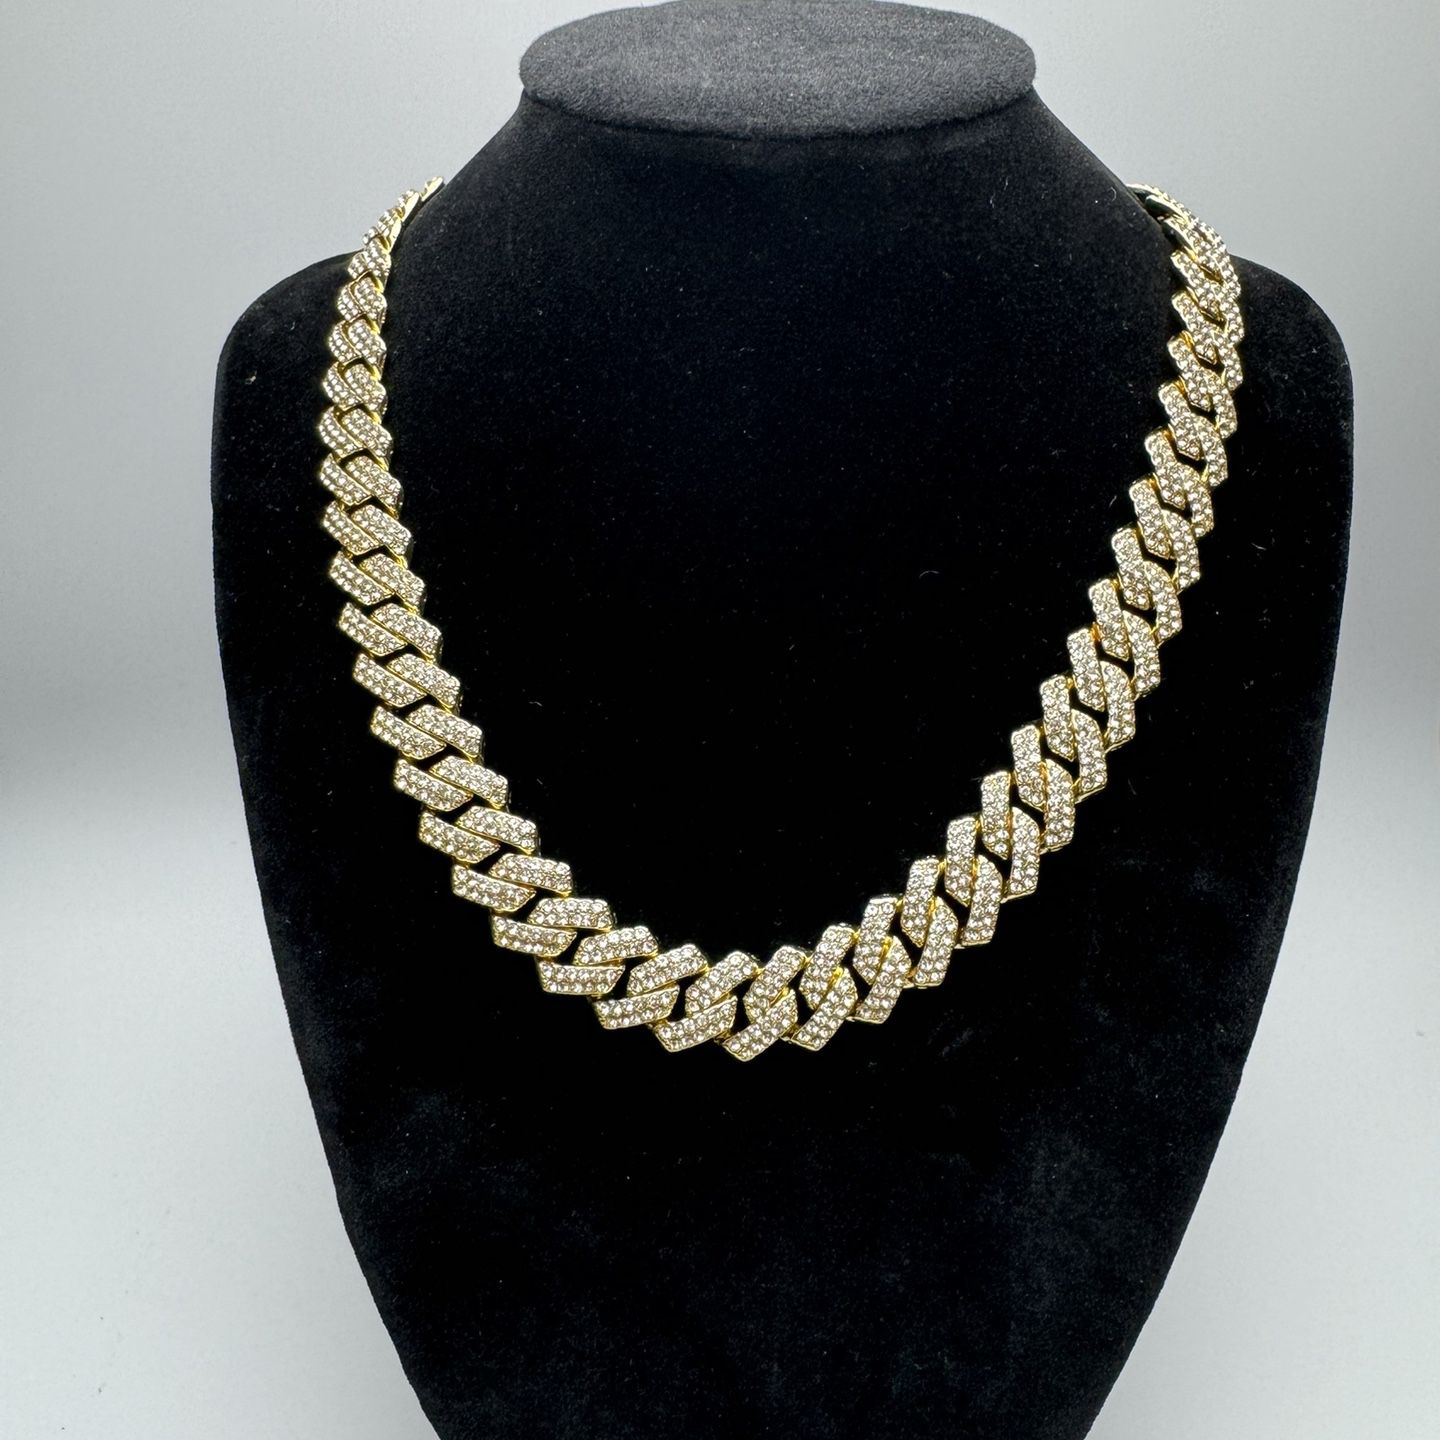 18k Plated Necklace 18”inches $45